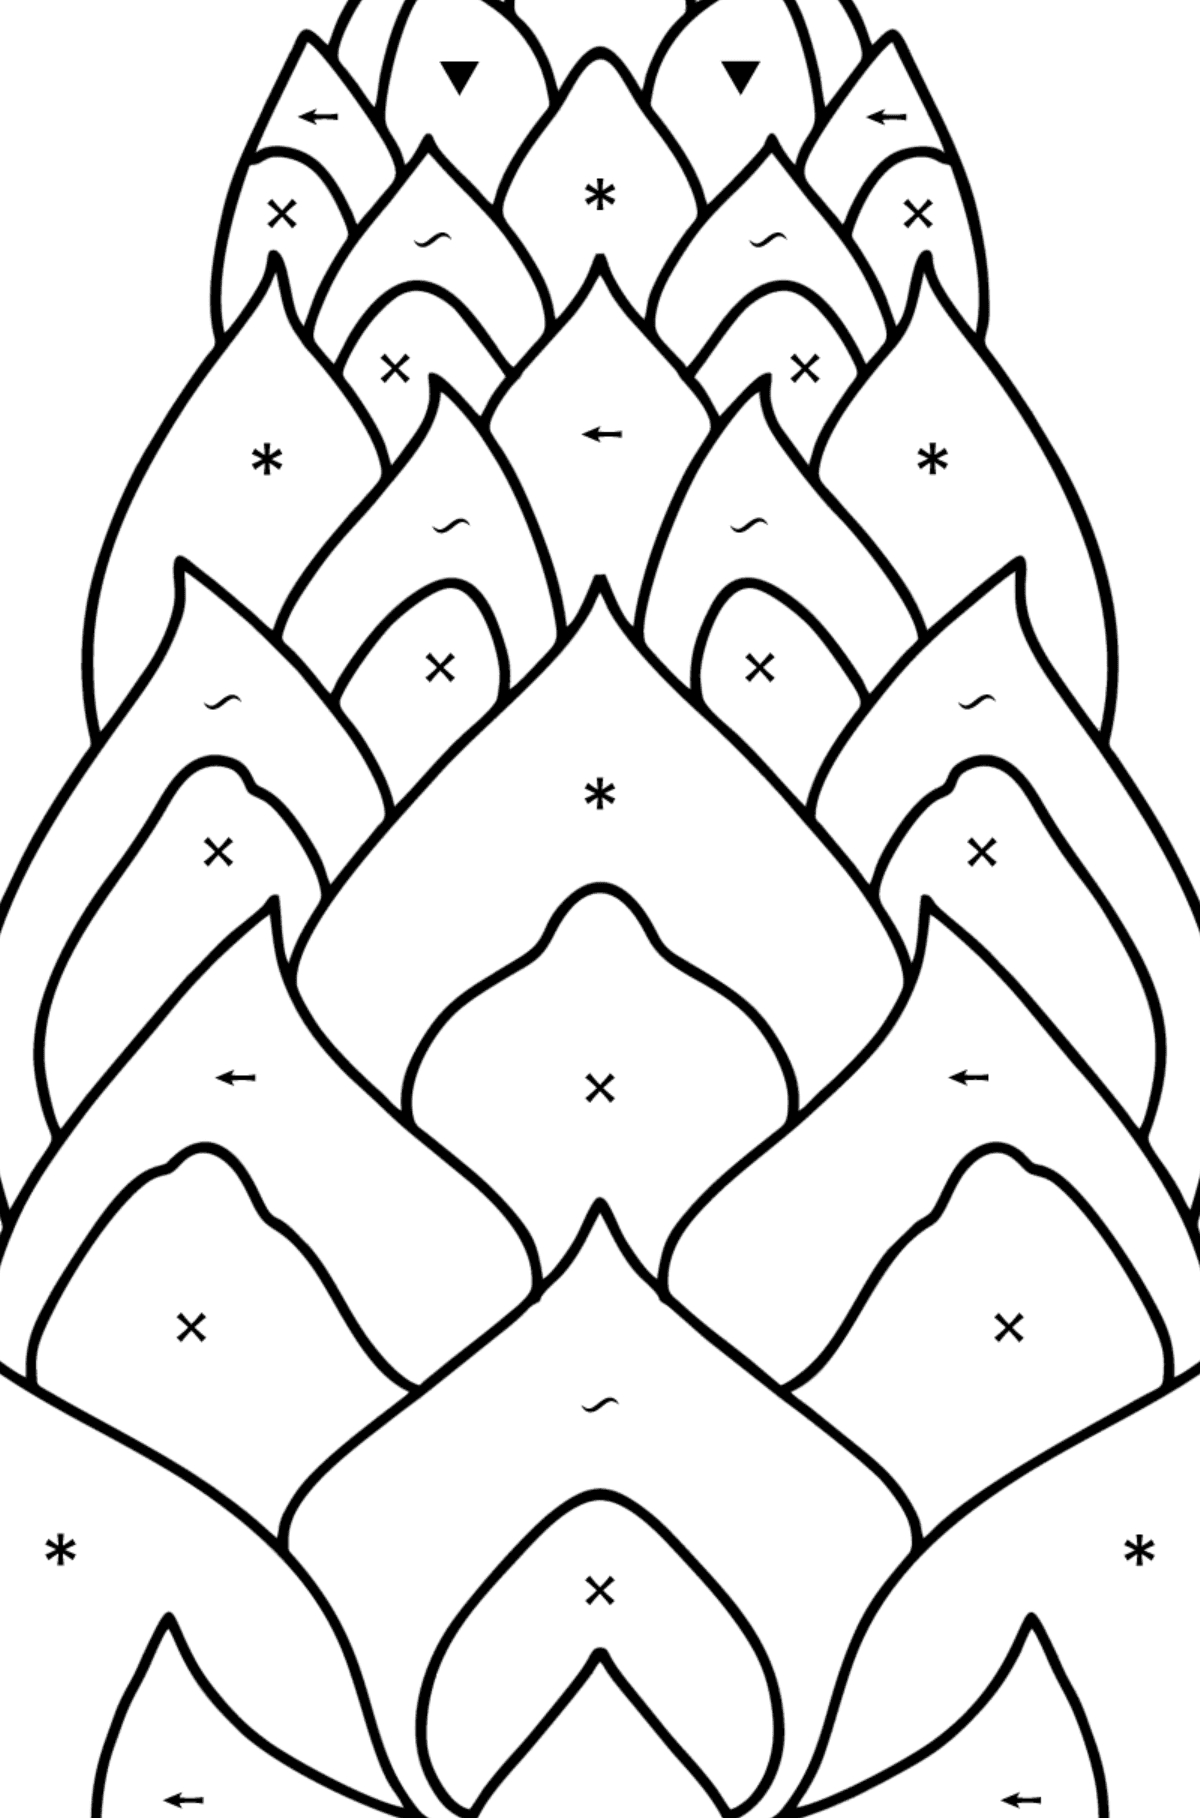 Pinecone from Lambert coloring page - Coloring by Symbols for Kids